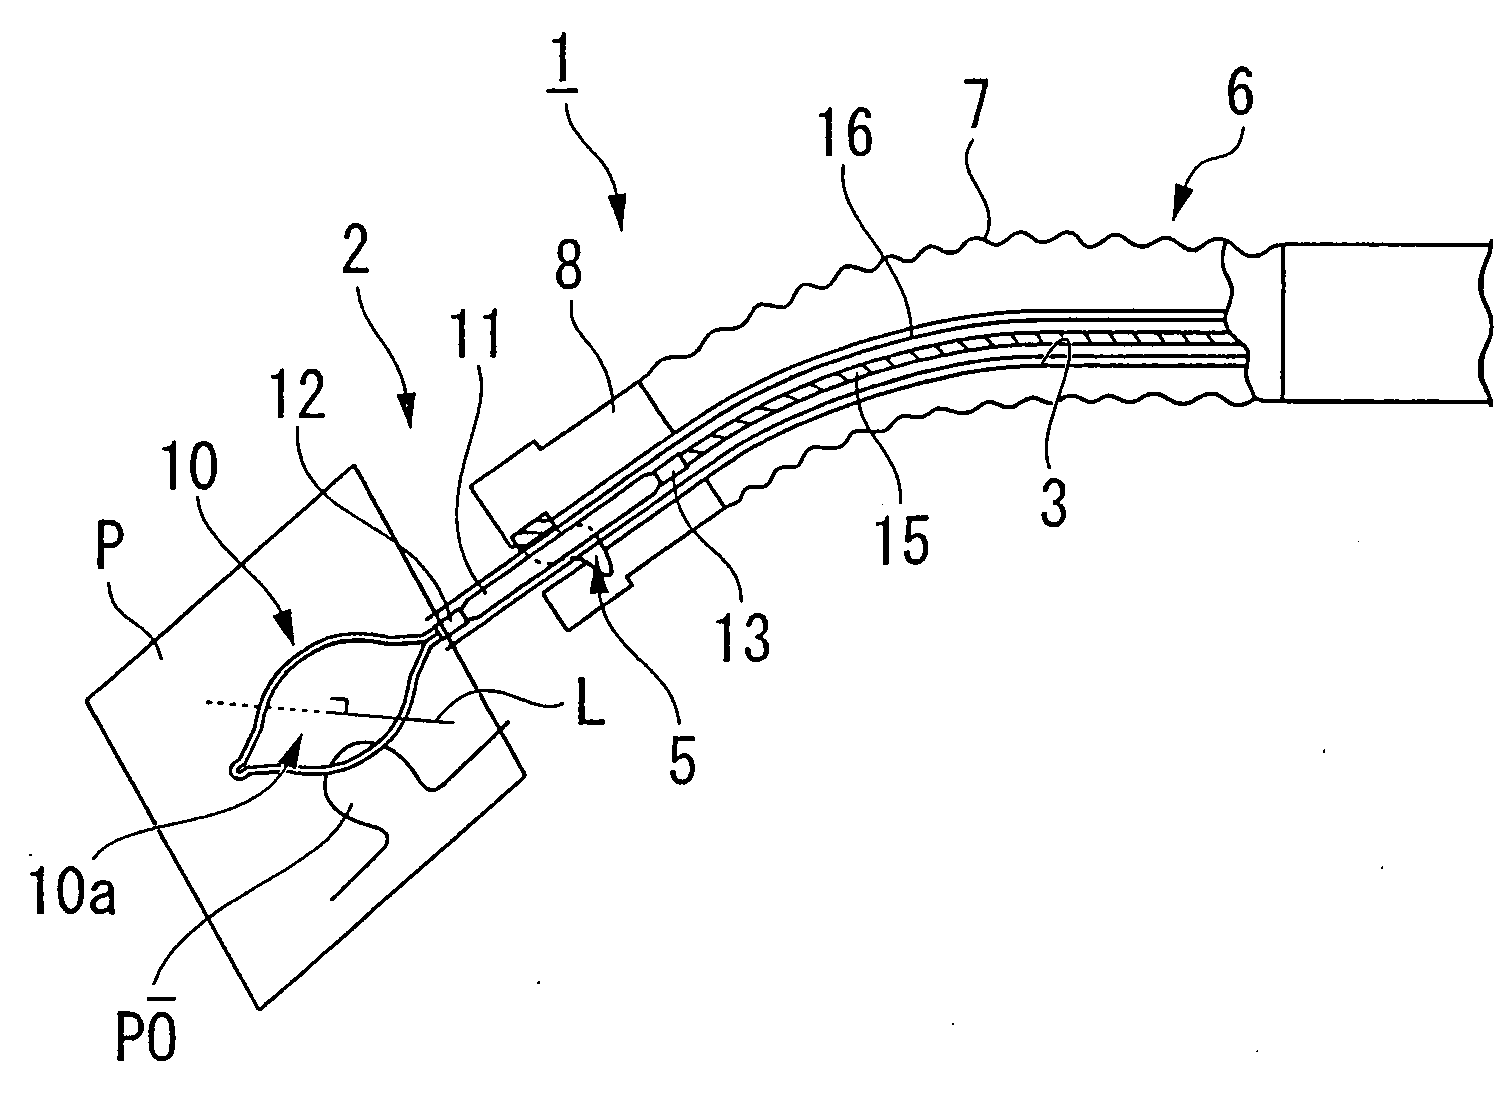 Endoscopic treatment instrument and endoscope system